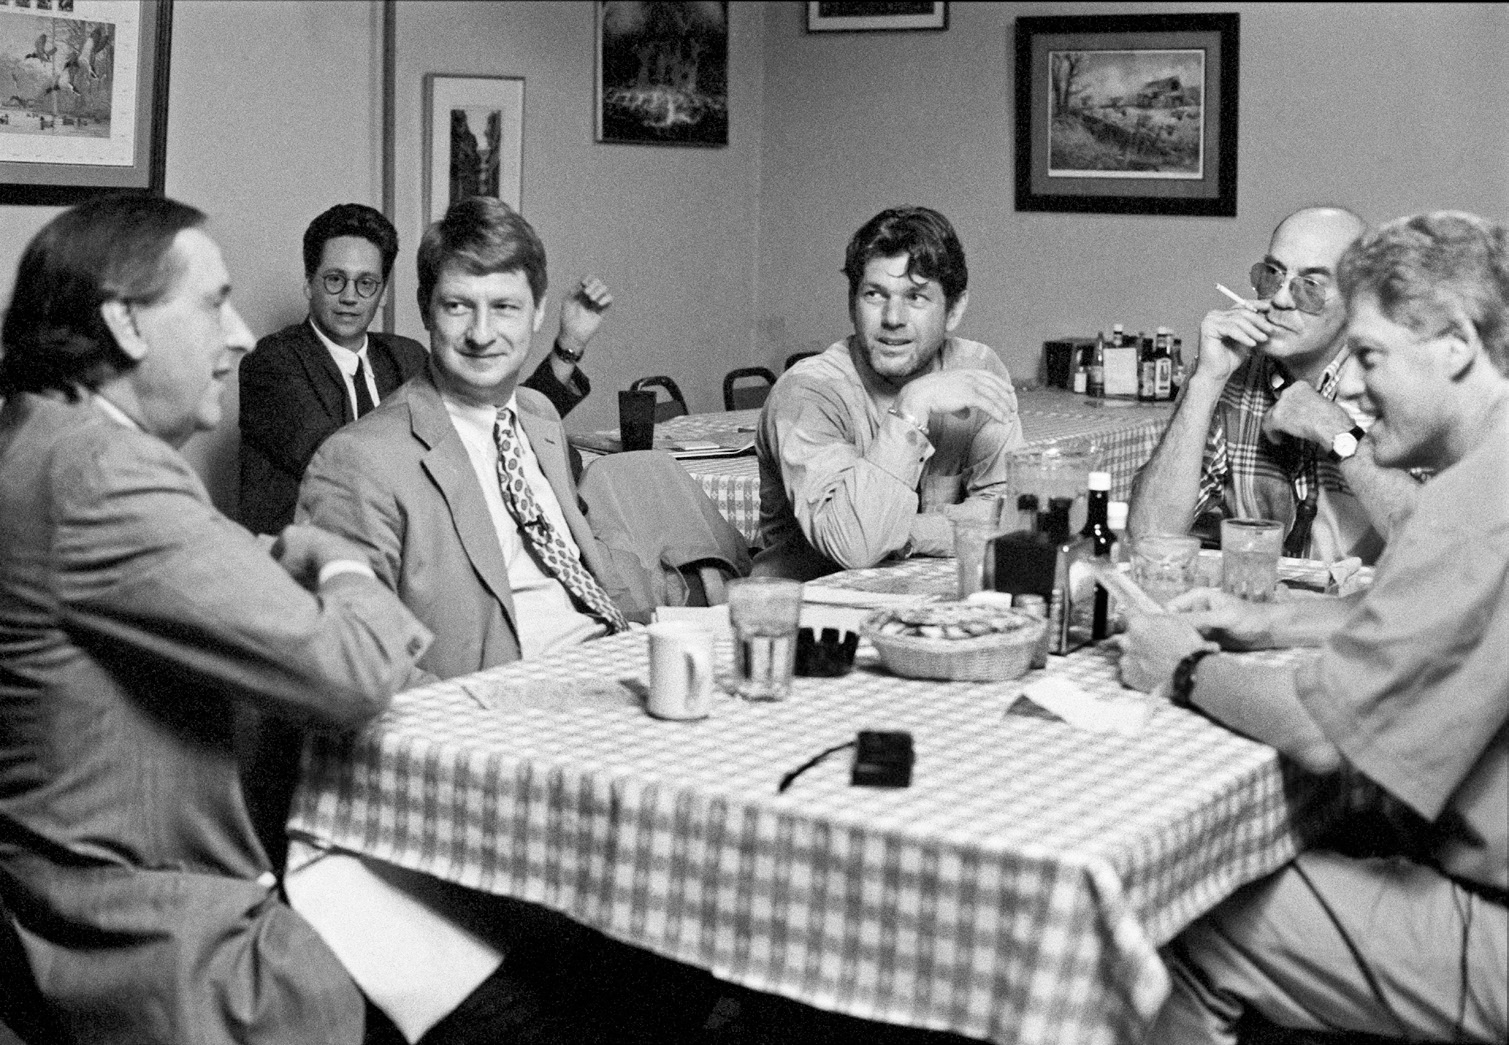 Wenner and his writers—William Greider, P.J. O’Rourke, and Hunter Thompson—interviewing Bill Clinton at Doe’s Eat Place, in Little Rock, Arkansas, 1992 (Mark Seliger)